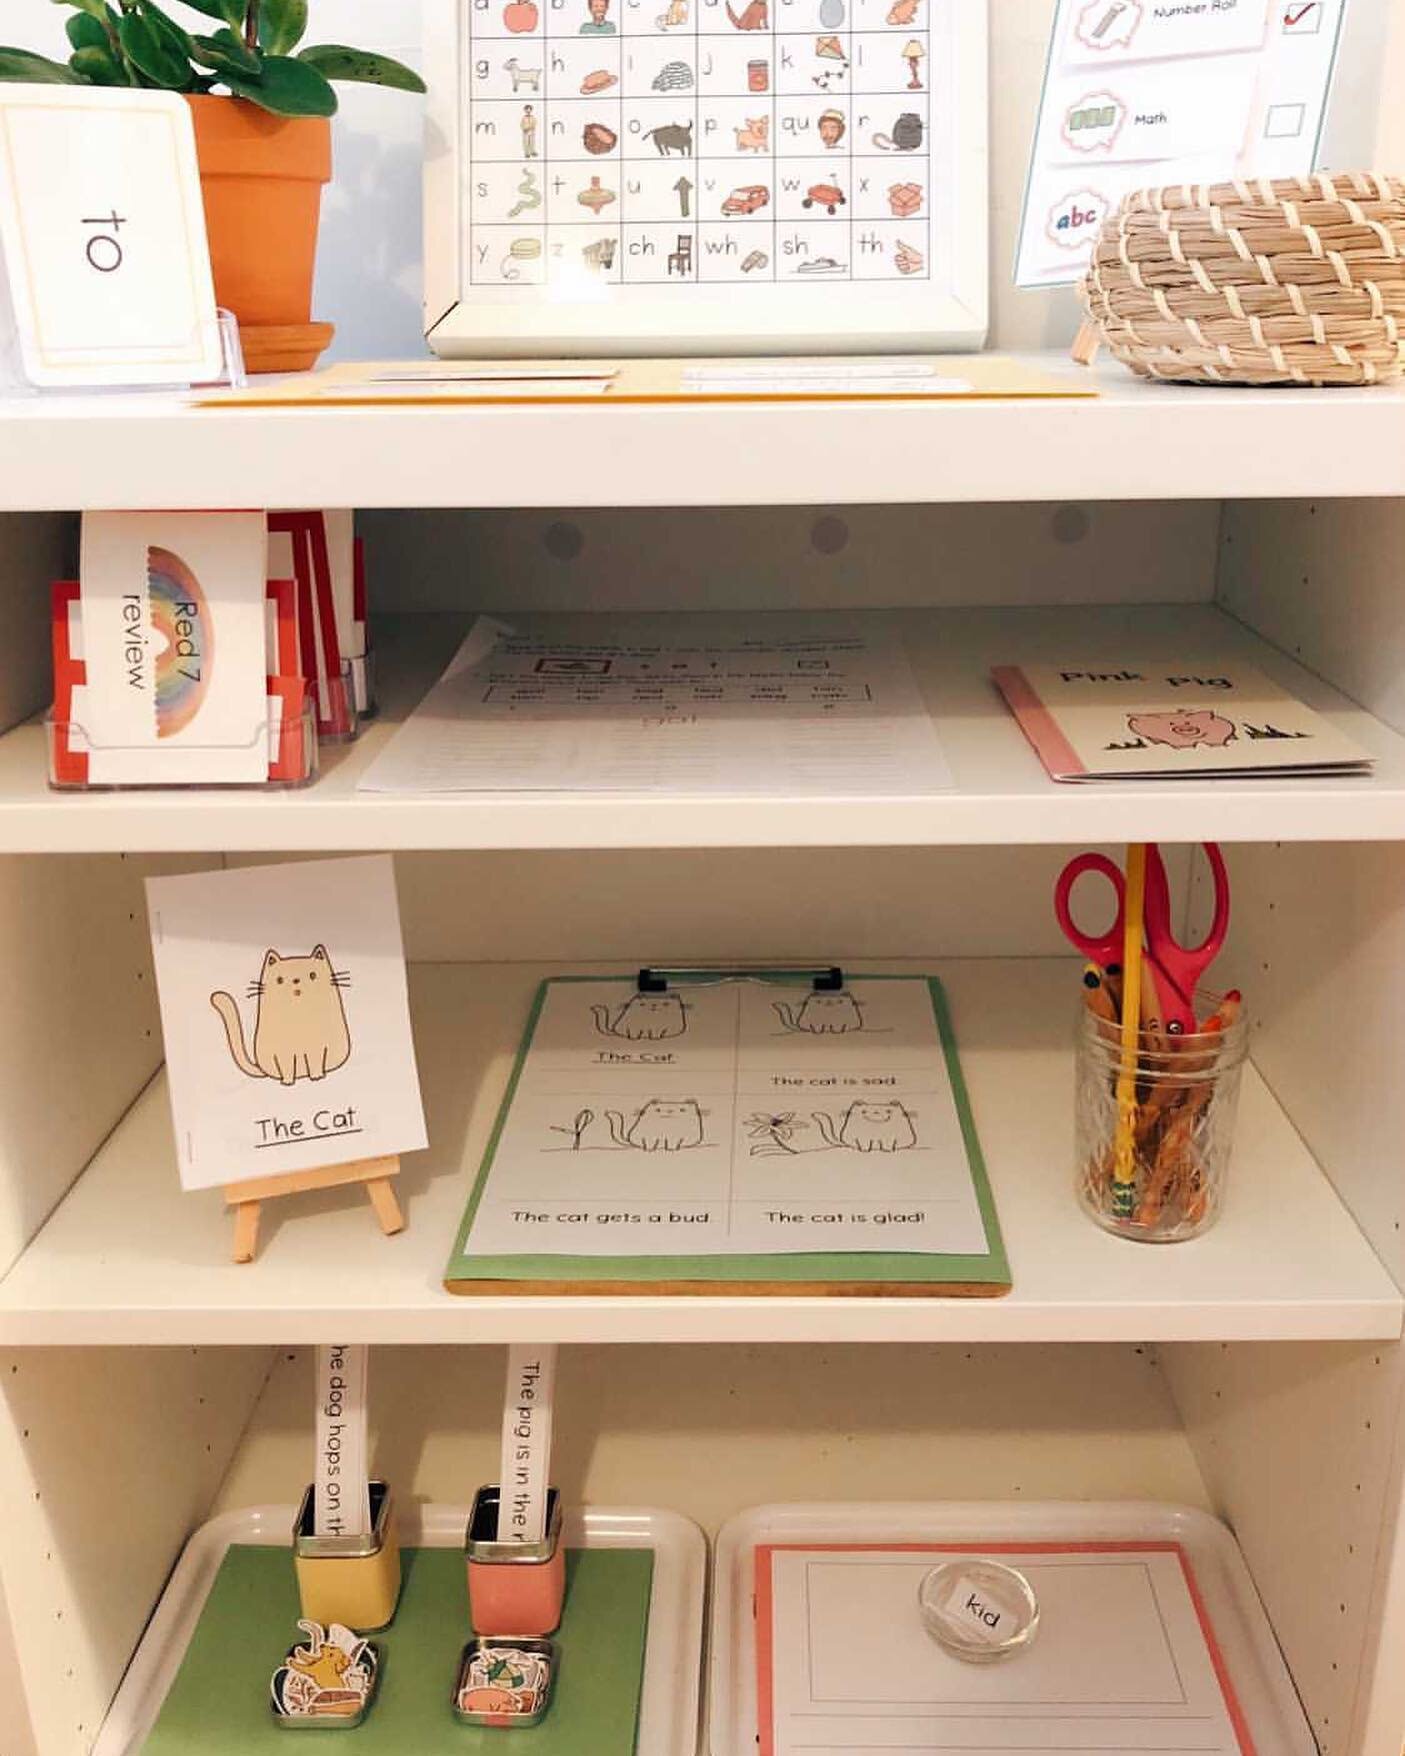 Look at this beautiful and simple shelf from Rachel at @homeschool.for.now. She is stocked with Missy Montessori goodies! ⁣
⁣
From left to right, top to bottom:⁣
⁣
Top Shelf: Trick Word Cards (find this as a single under Language), ABC Chart (find th